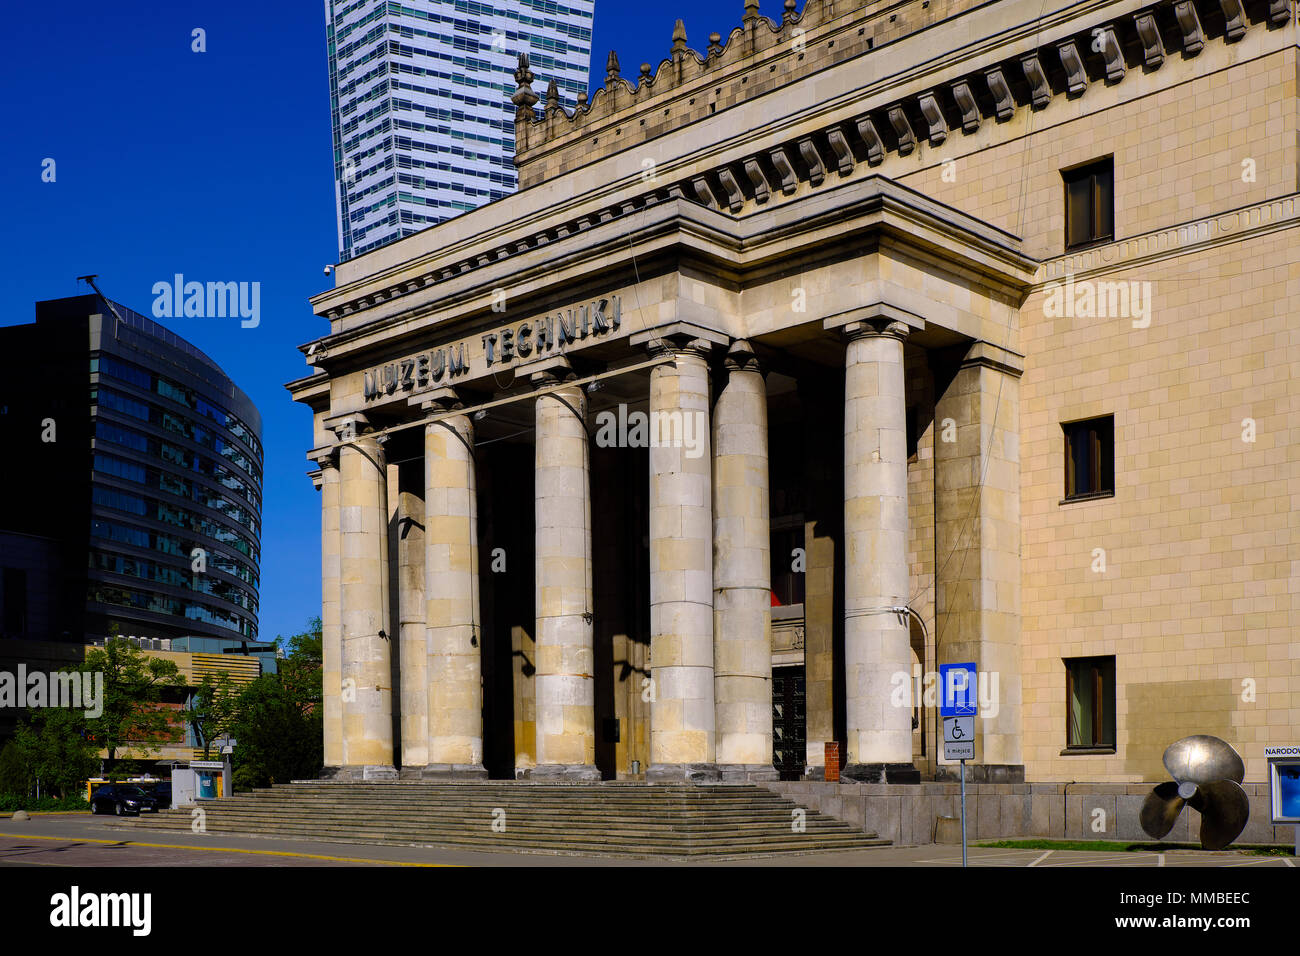 Warsaw, Masovia / Poland - 2018/04/22: Technology Museum within the Palace of Culture and Science complex in Warsaw city center Stock Photo